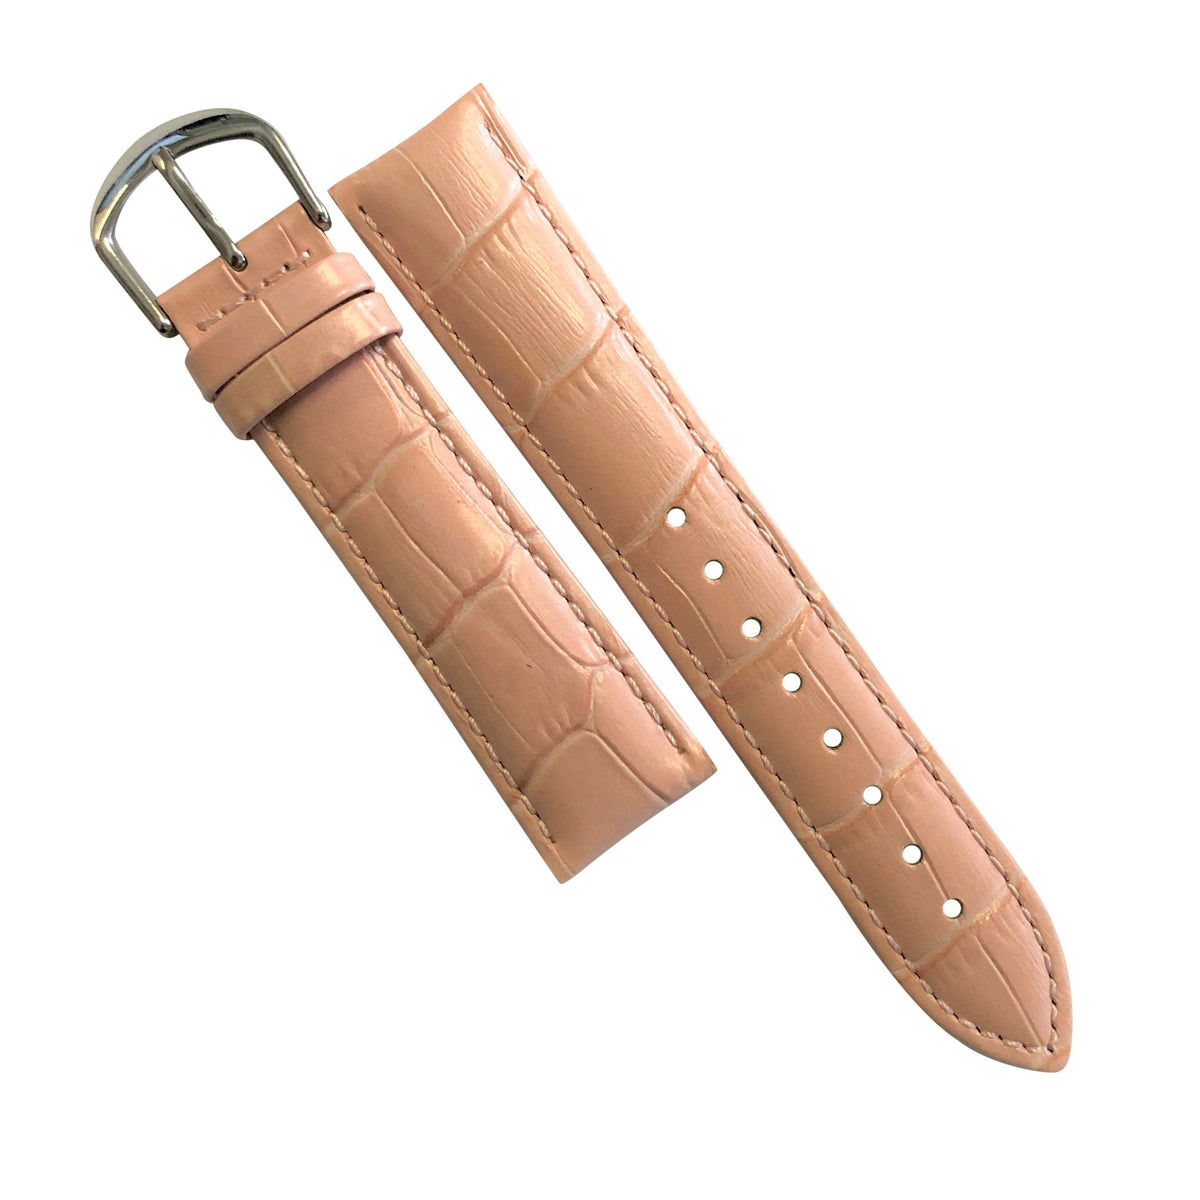 Genuine Croc Pattern Stitched Leather Watch Strap in Pink with Silver Buckle (12mm) - Nomad Watch Works Malaysia